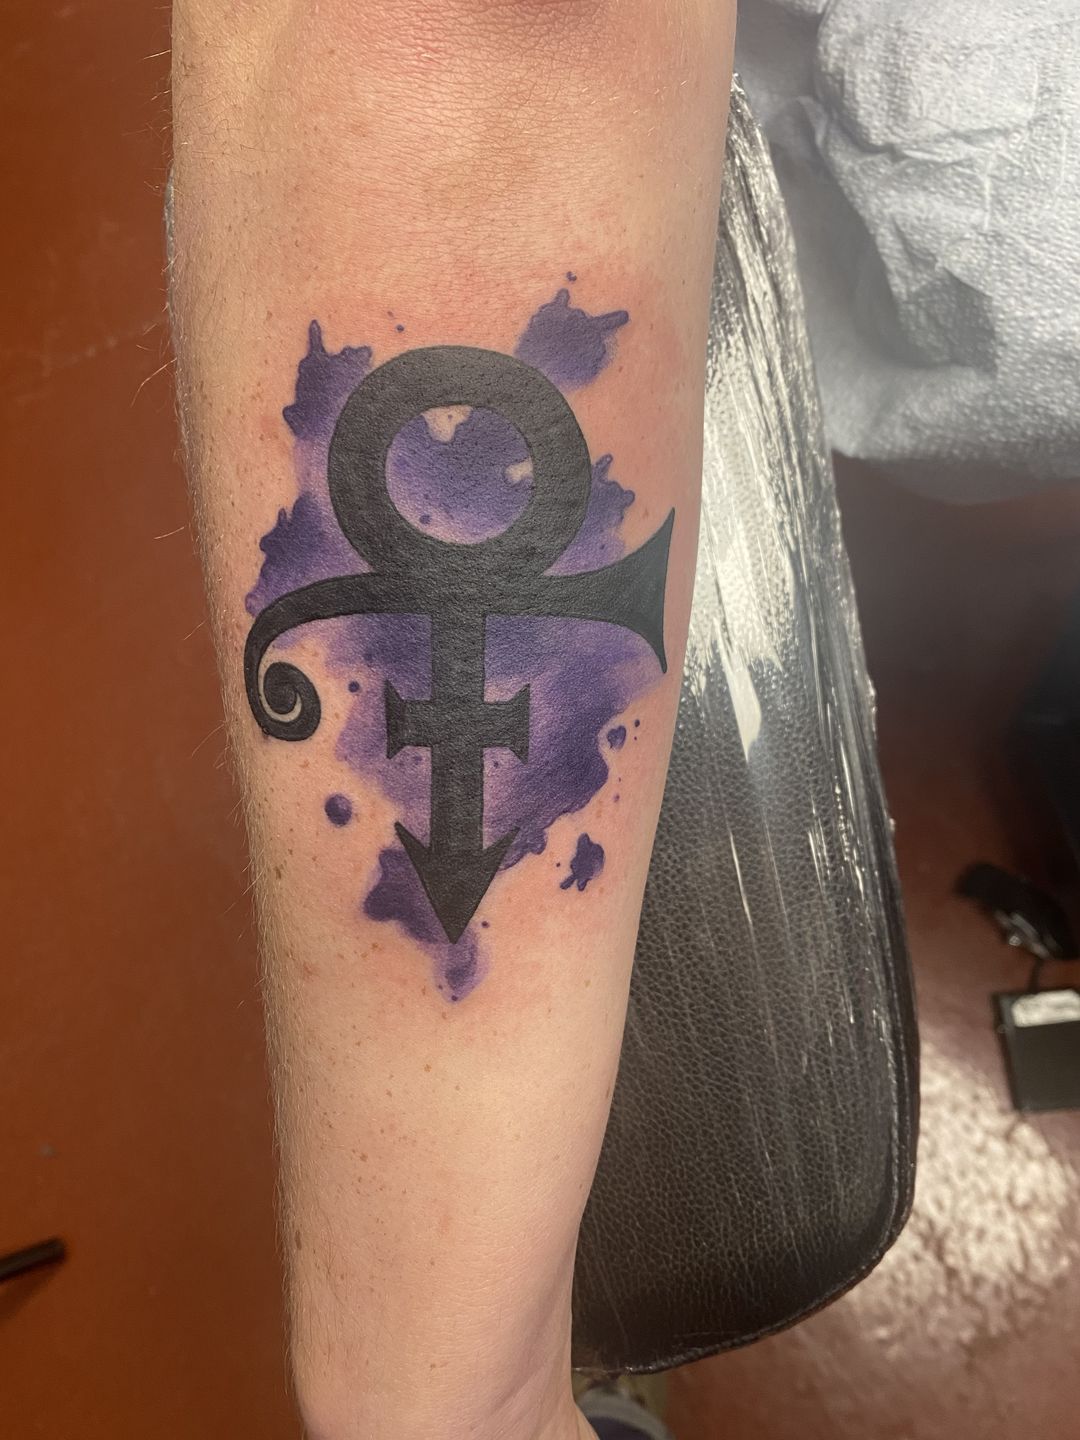 Fans show off their Prince tattoos in wake of singers death